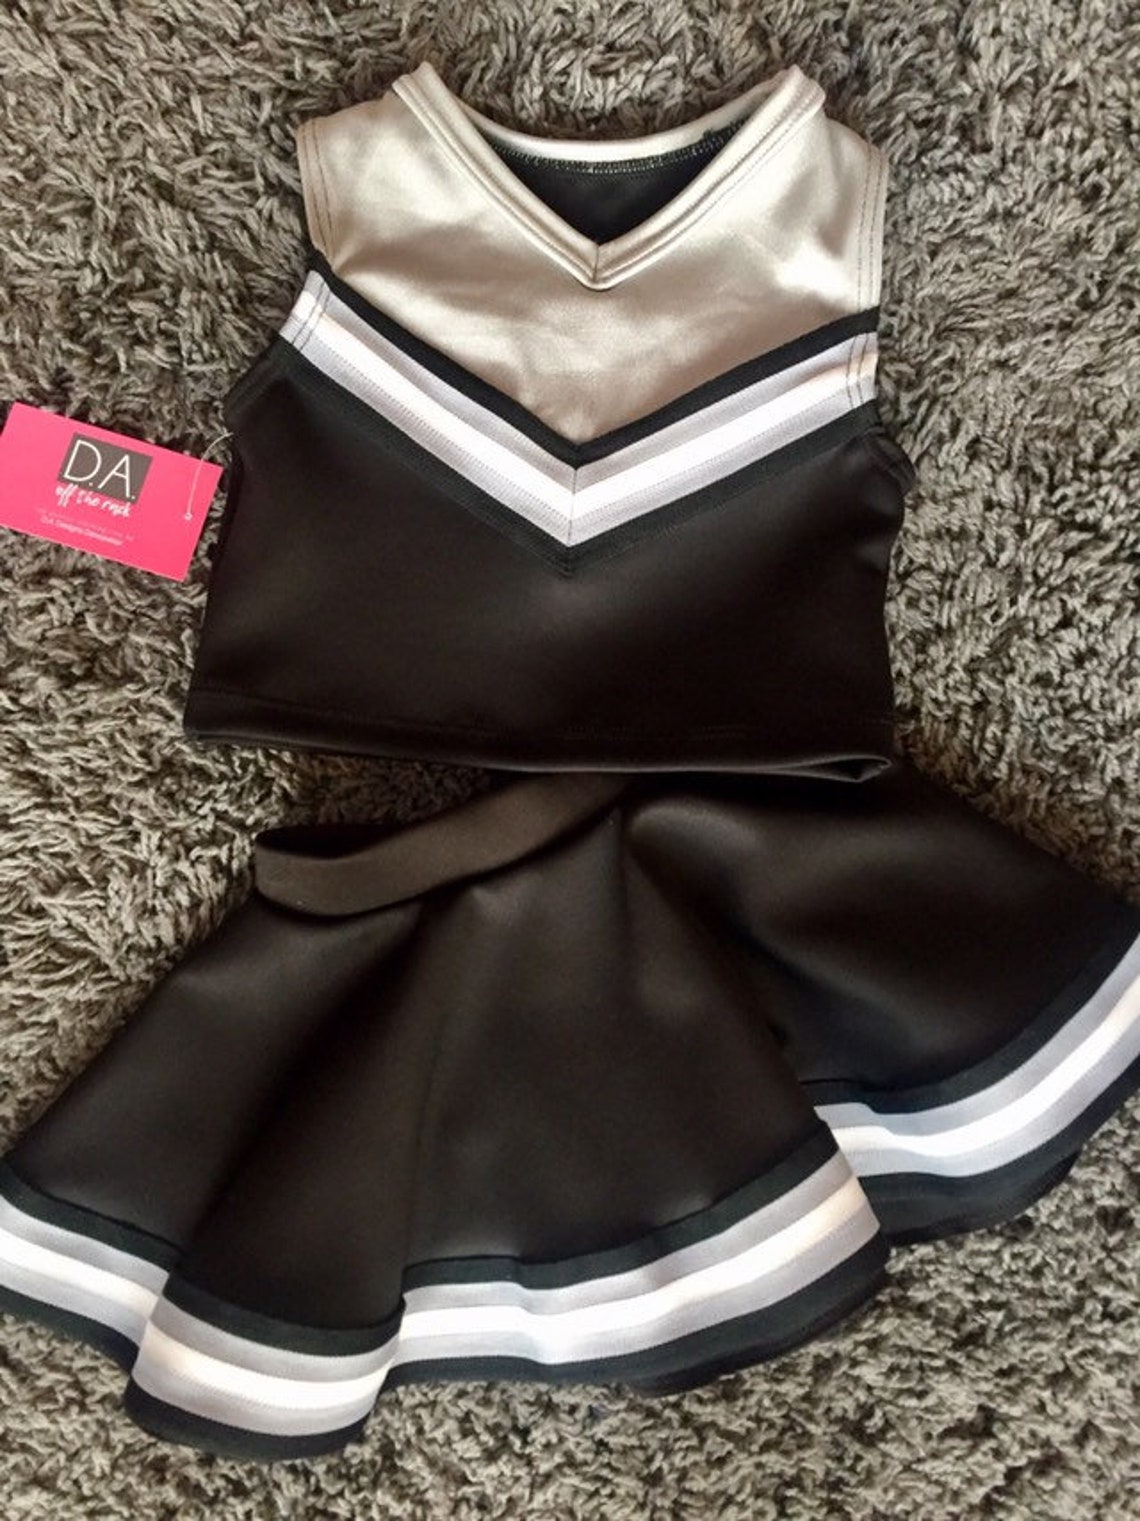 Girls Cheer Uniform Available in Several Colors - Etsy